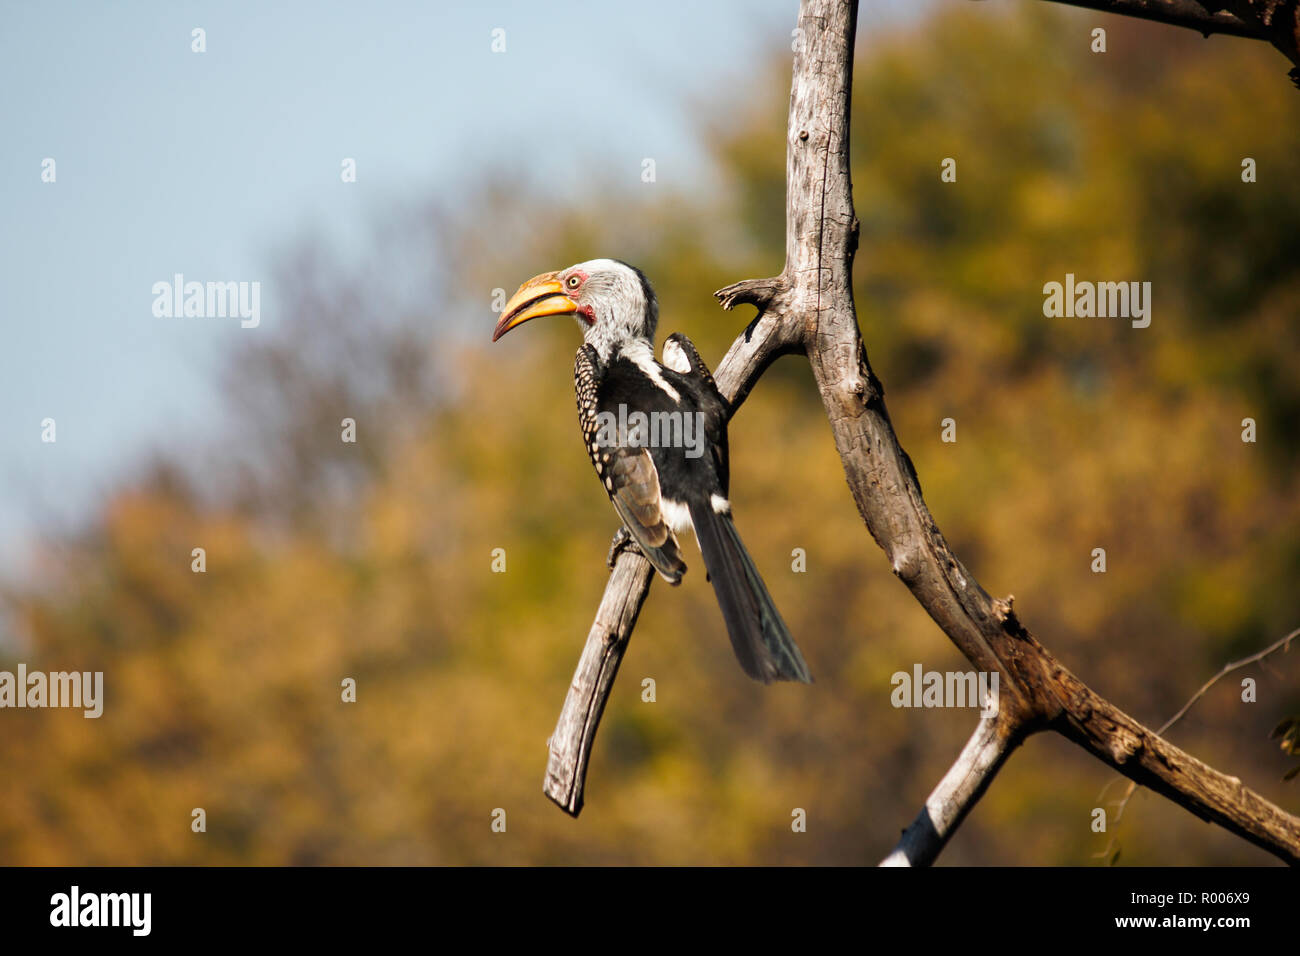 Southern Yellow-billed Hornbill (tockus flavirostris) In The Wild Stock Photo